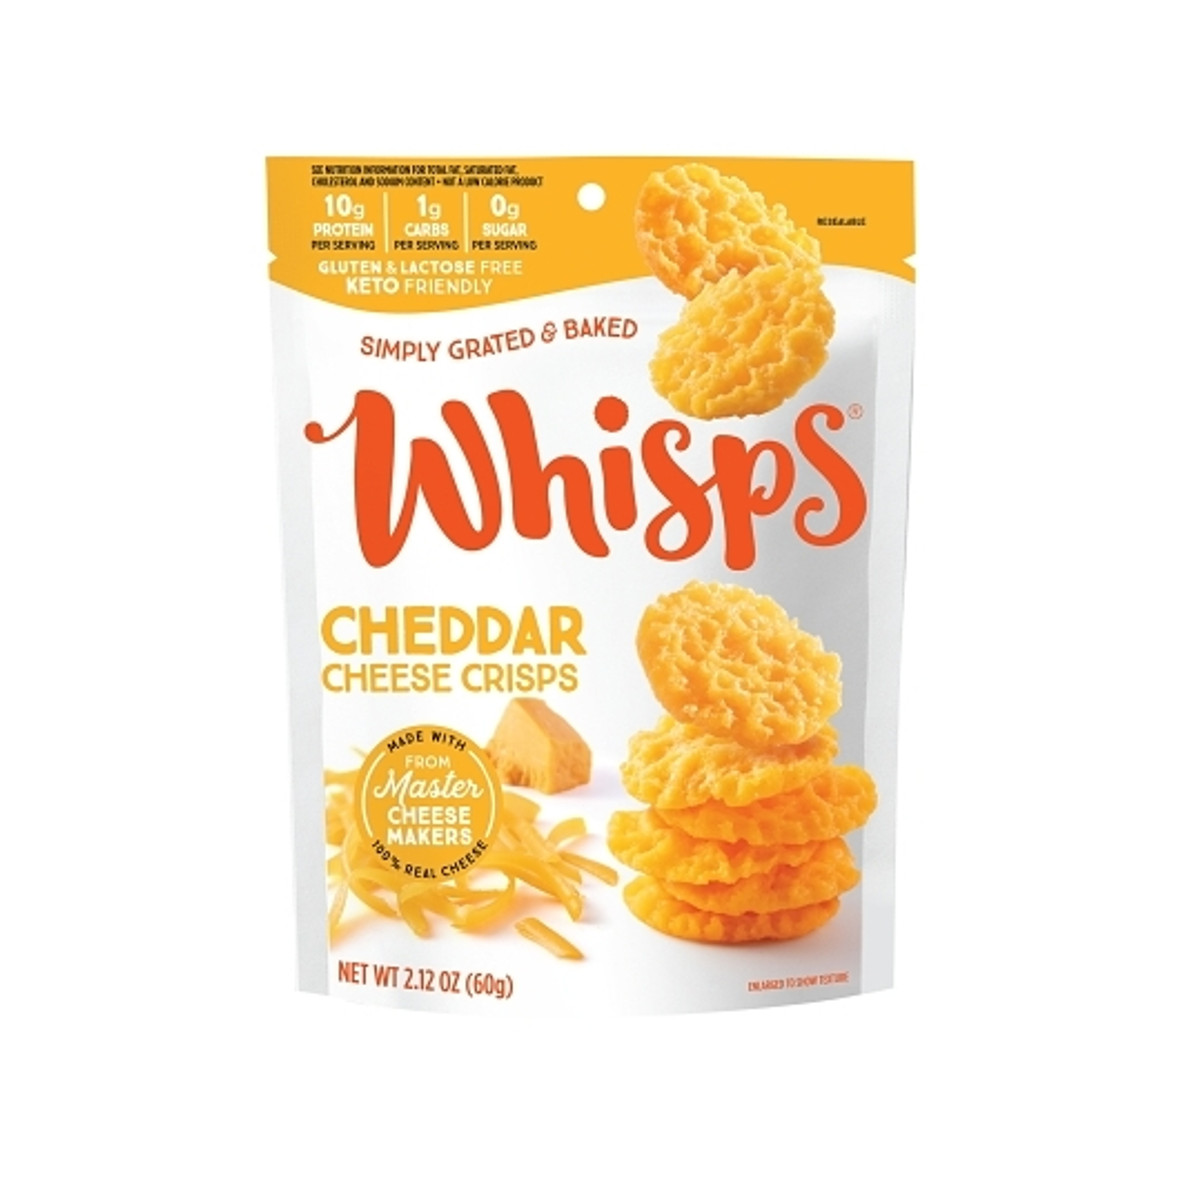 Whisps Cheddar Cheese Crisps, 2.12 Ounces, 6 Per Case